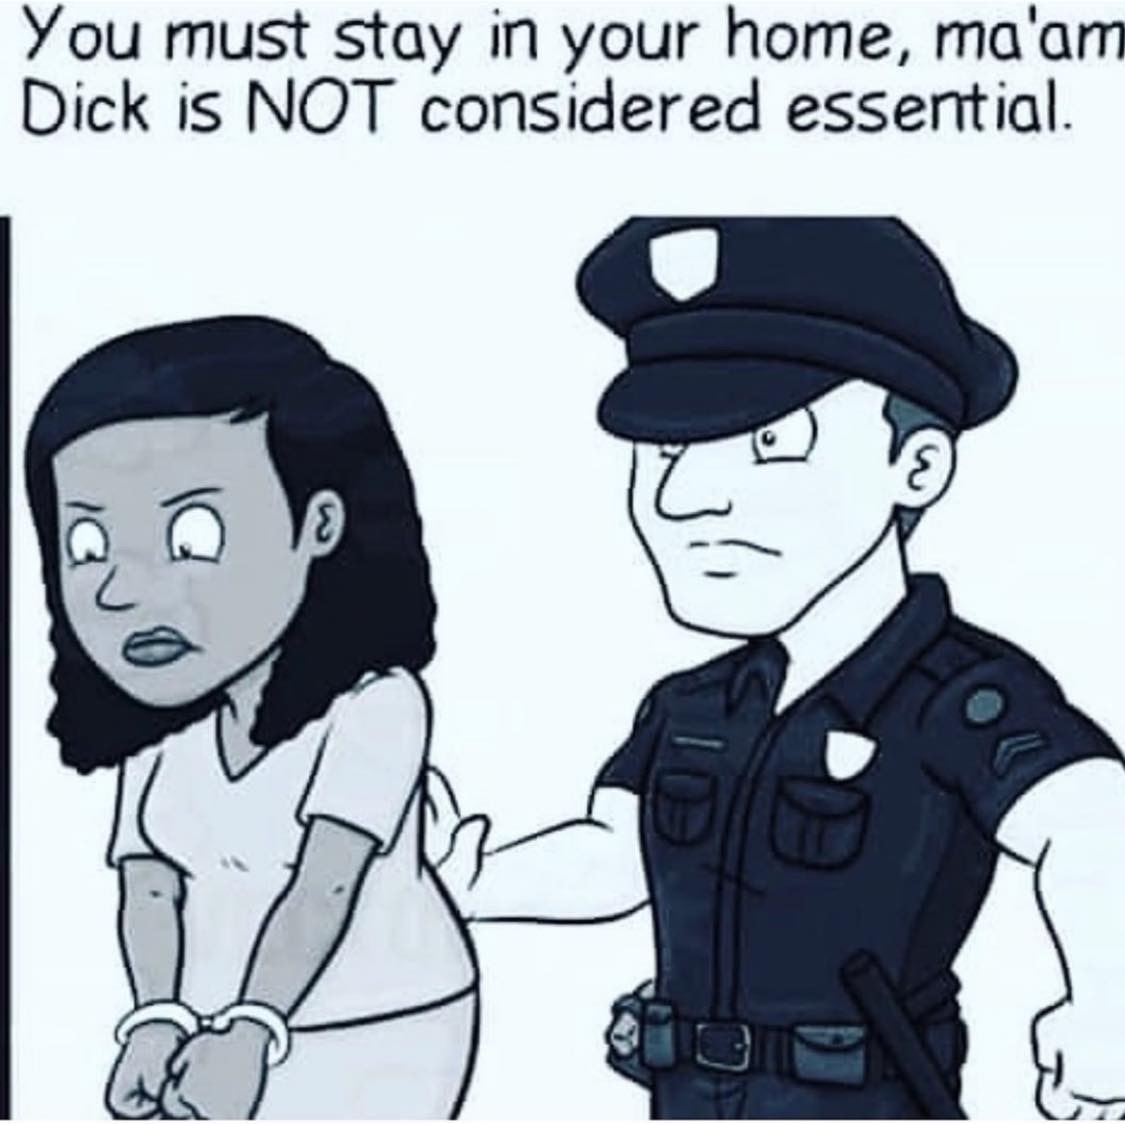 cartoon police office arresting woman - You must stay in your home, ma'am. Dick is Not considered essential.